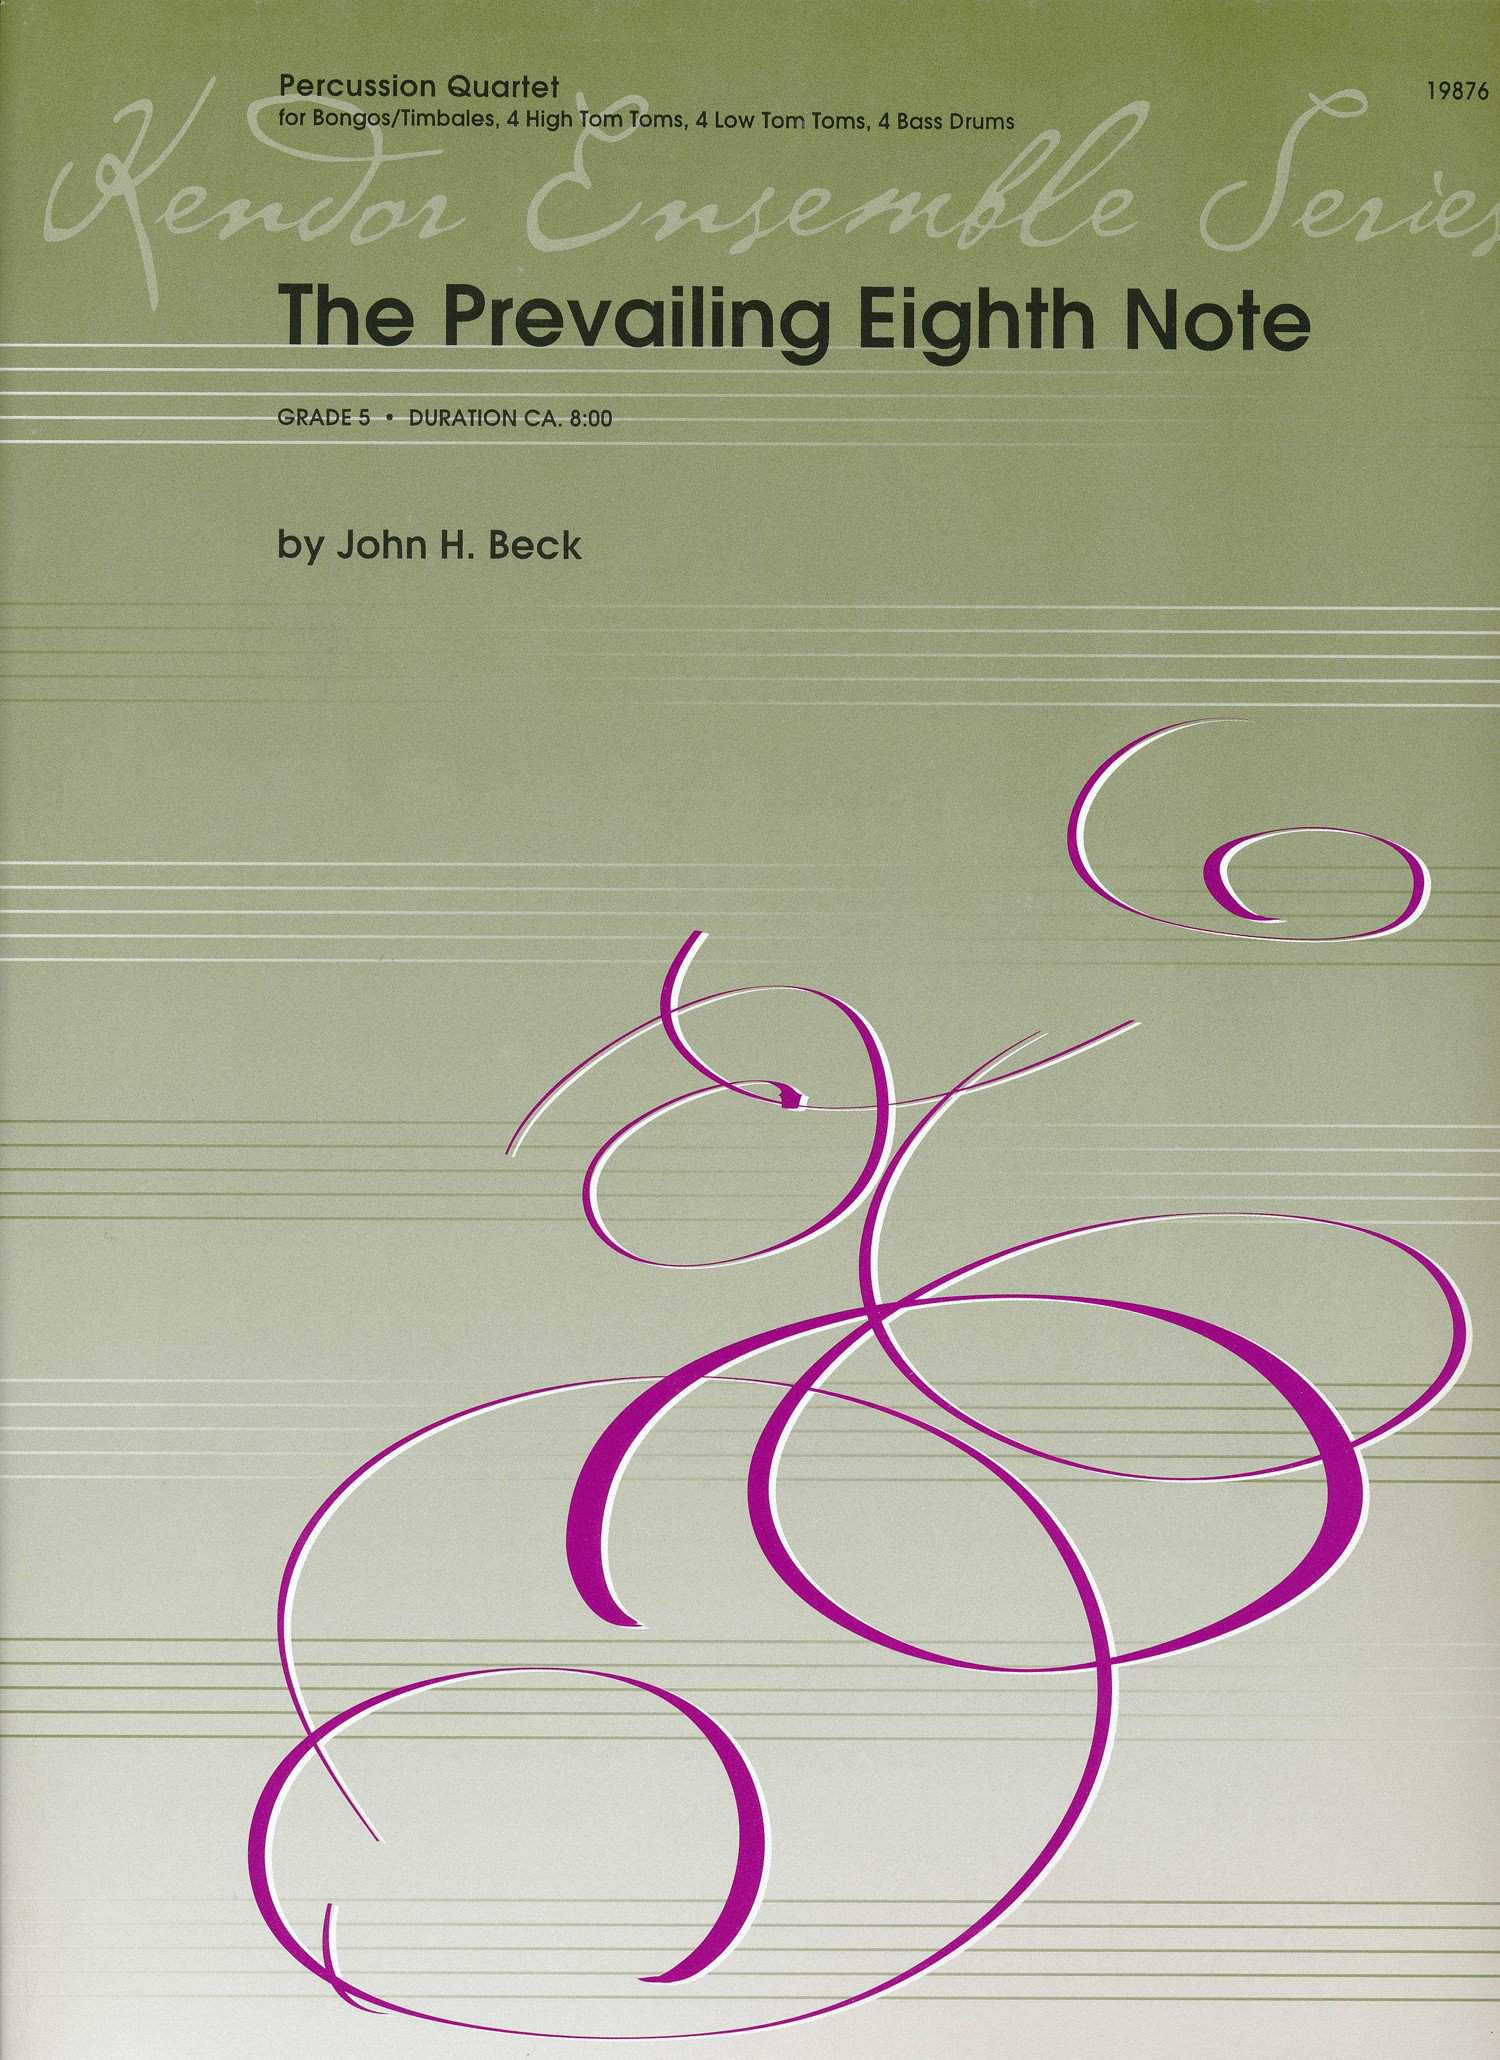 The Prevailing Eighth Note